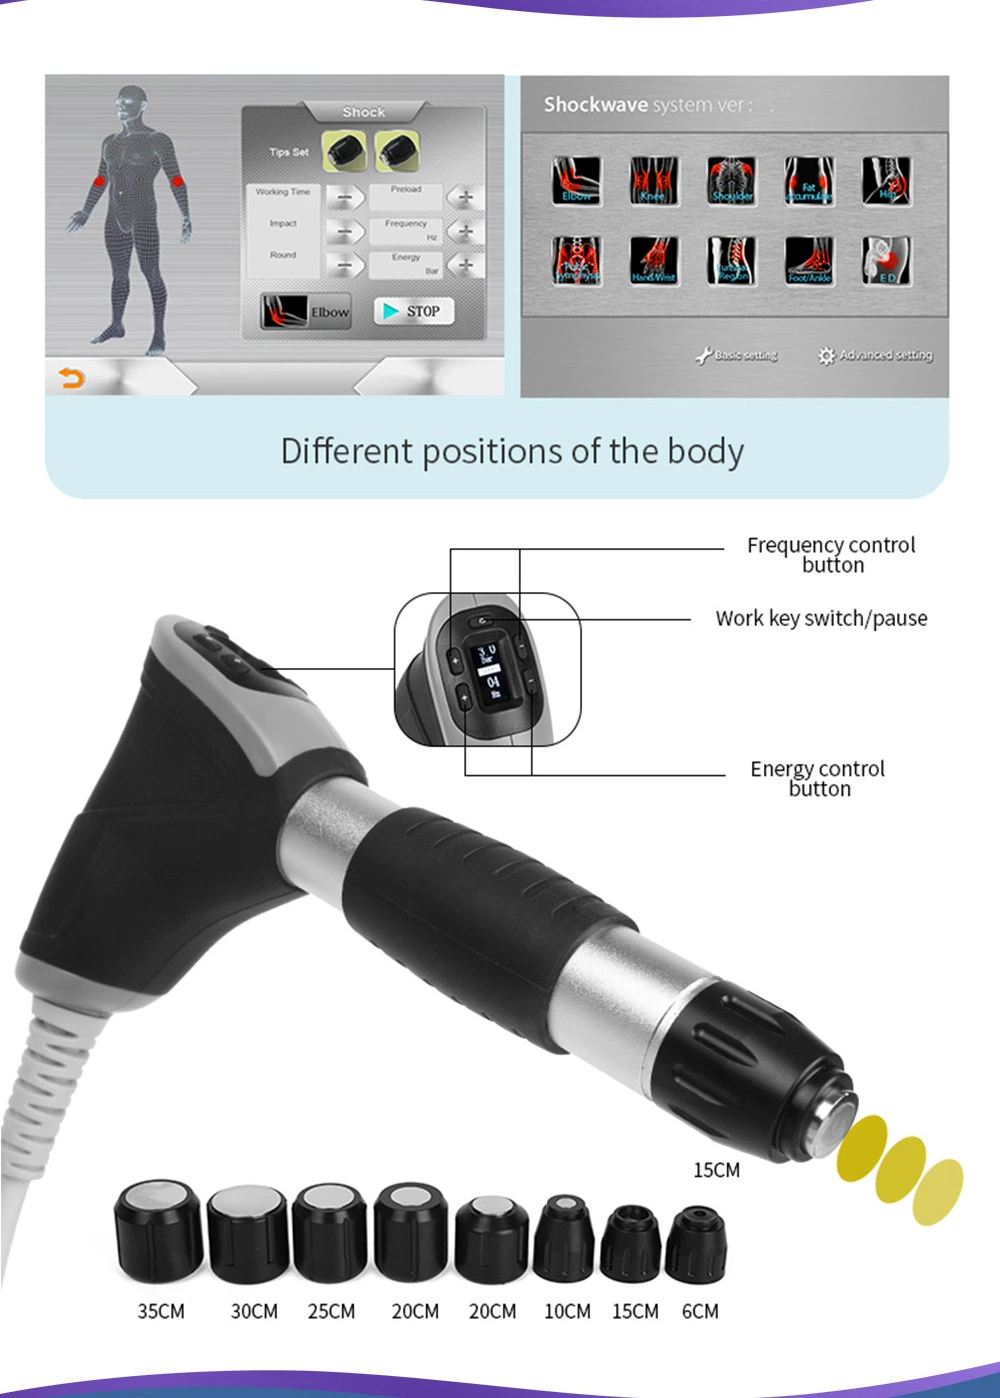 shockwave therapy machine for home use treatment area